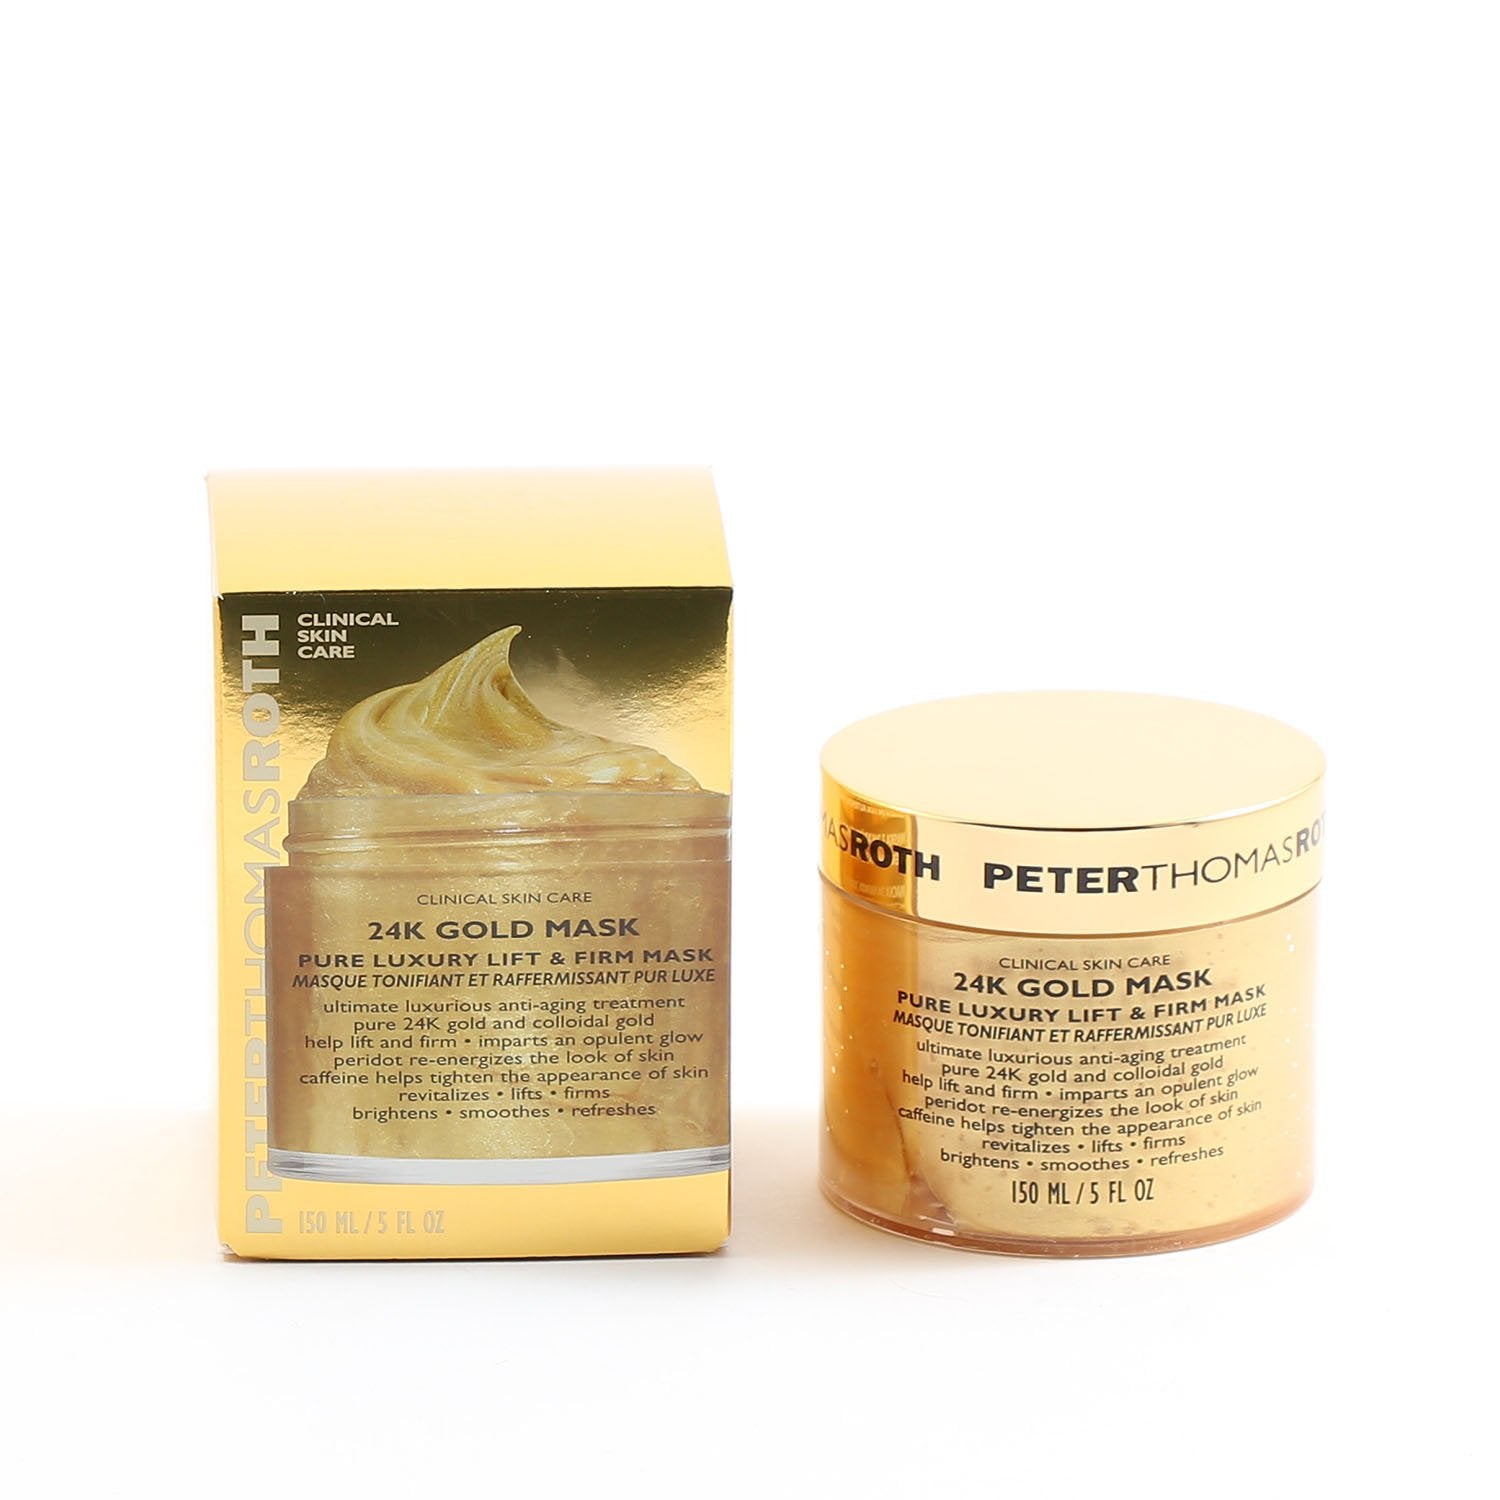 Skin Care - PETER THOMAS ROTH 24K GOLD PURE LUXURY LIFT & FIRM MASK, 5.0 OZ